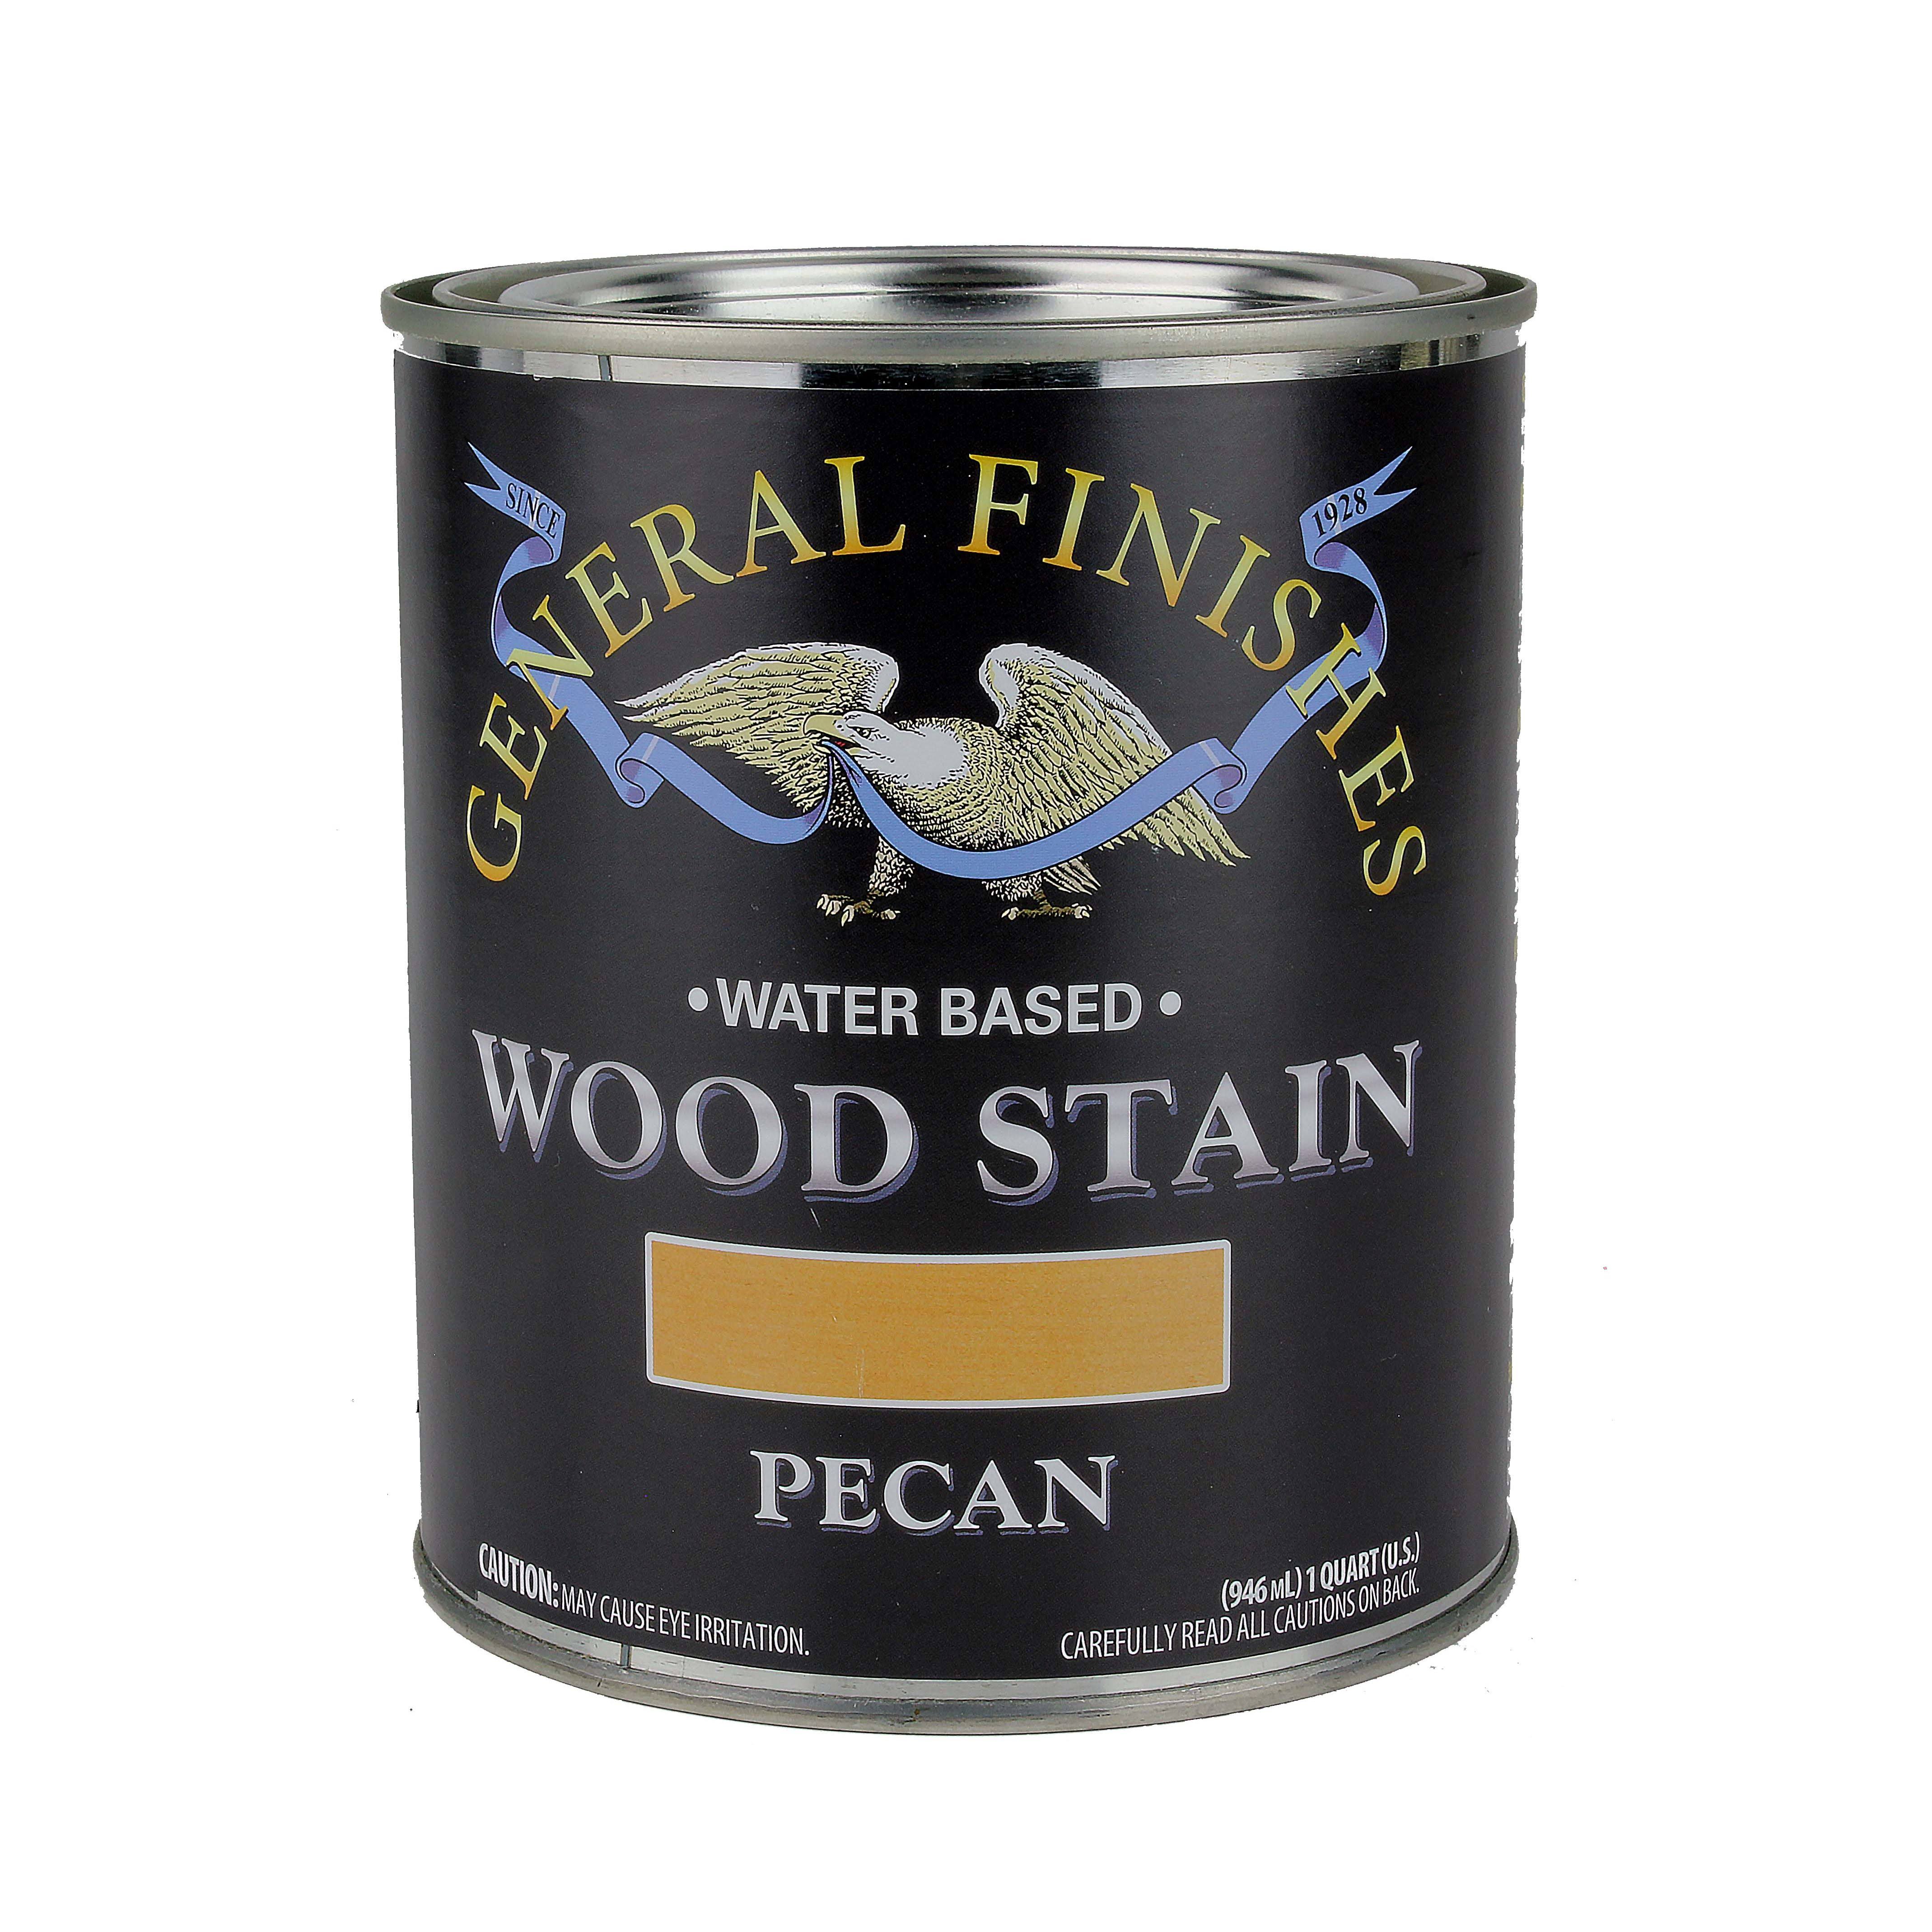 General Finishes WPQT Water Based Wood Stain - Pecan, 1qt